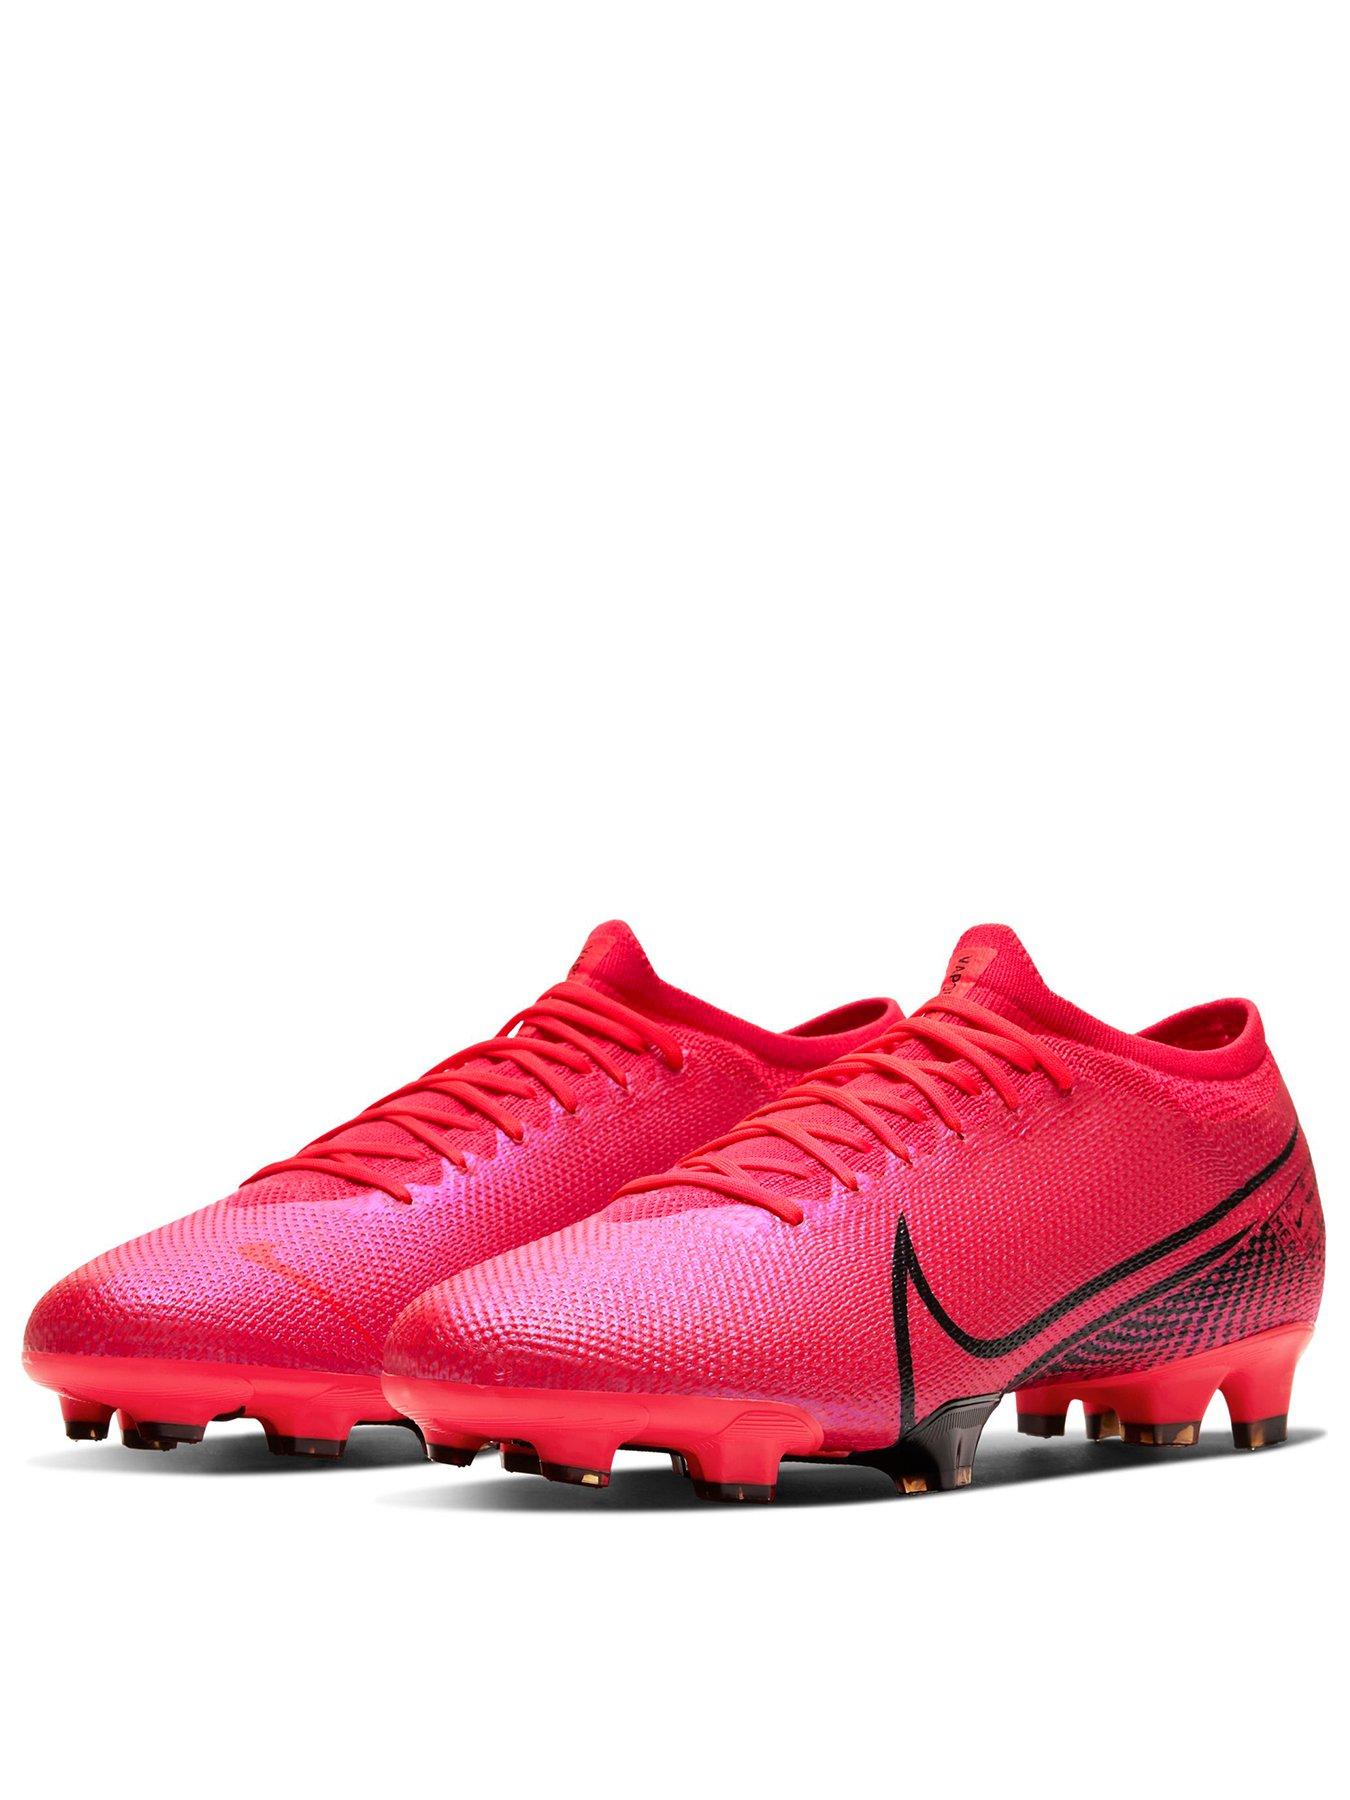 red and black nike boots